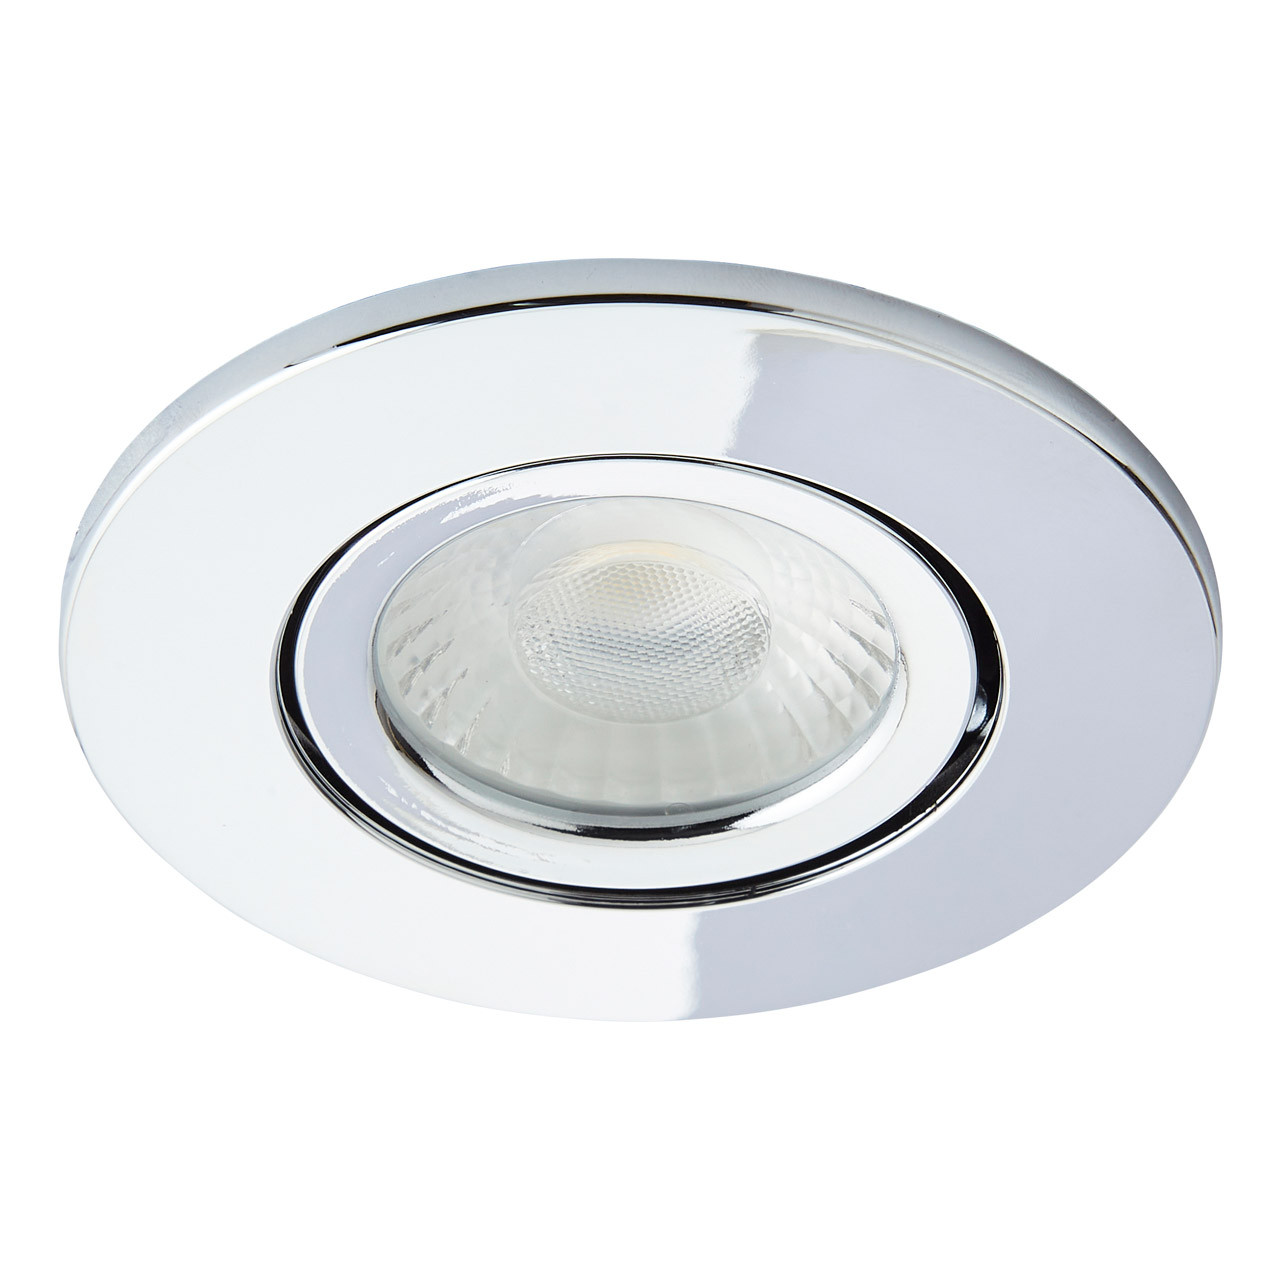 Photos - Chandelier / Lamp SPA Como LED Tiltable Fire Rated Downlight 5W Dimmable Cool White Chrome I 